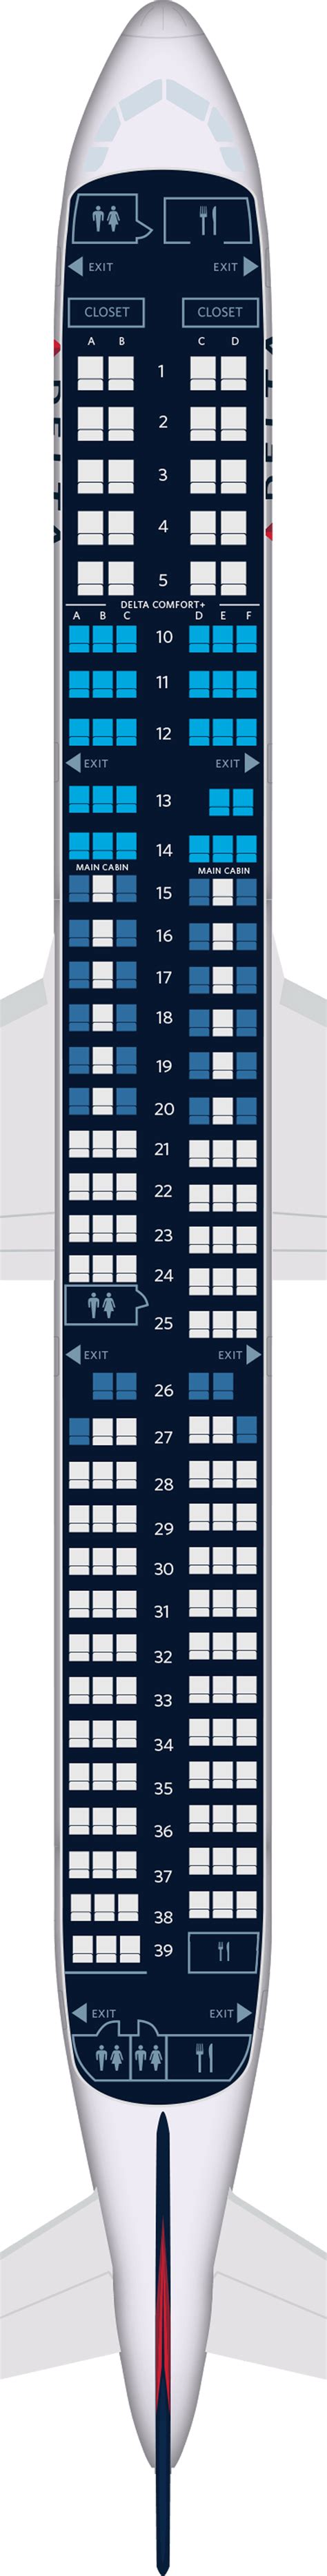 For your next Delta flight, use this seating chart to get the most